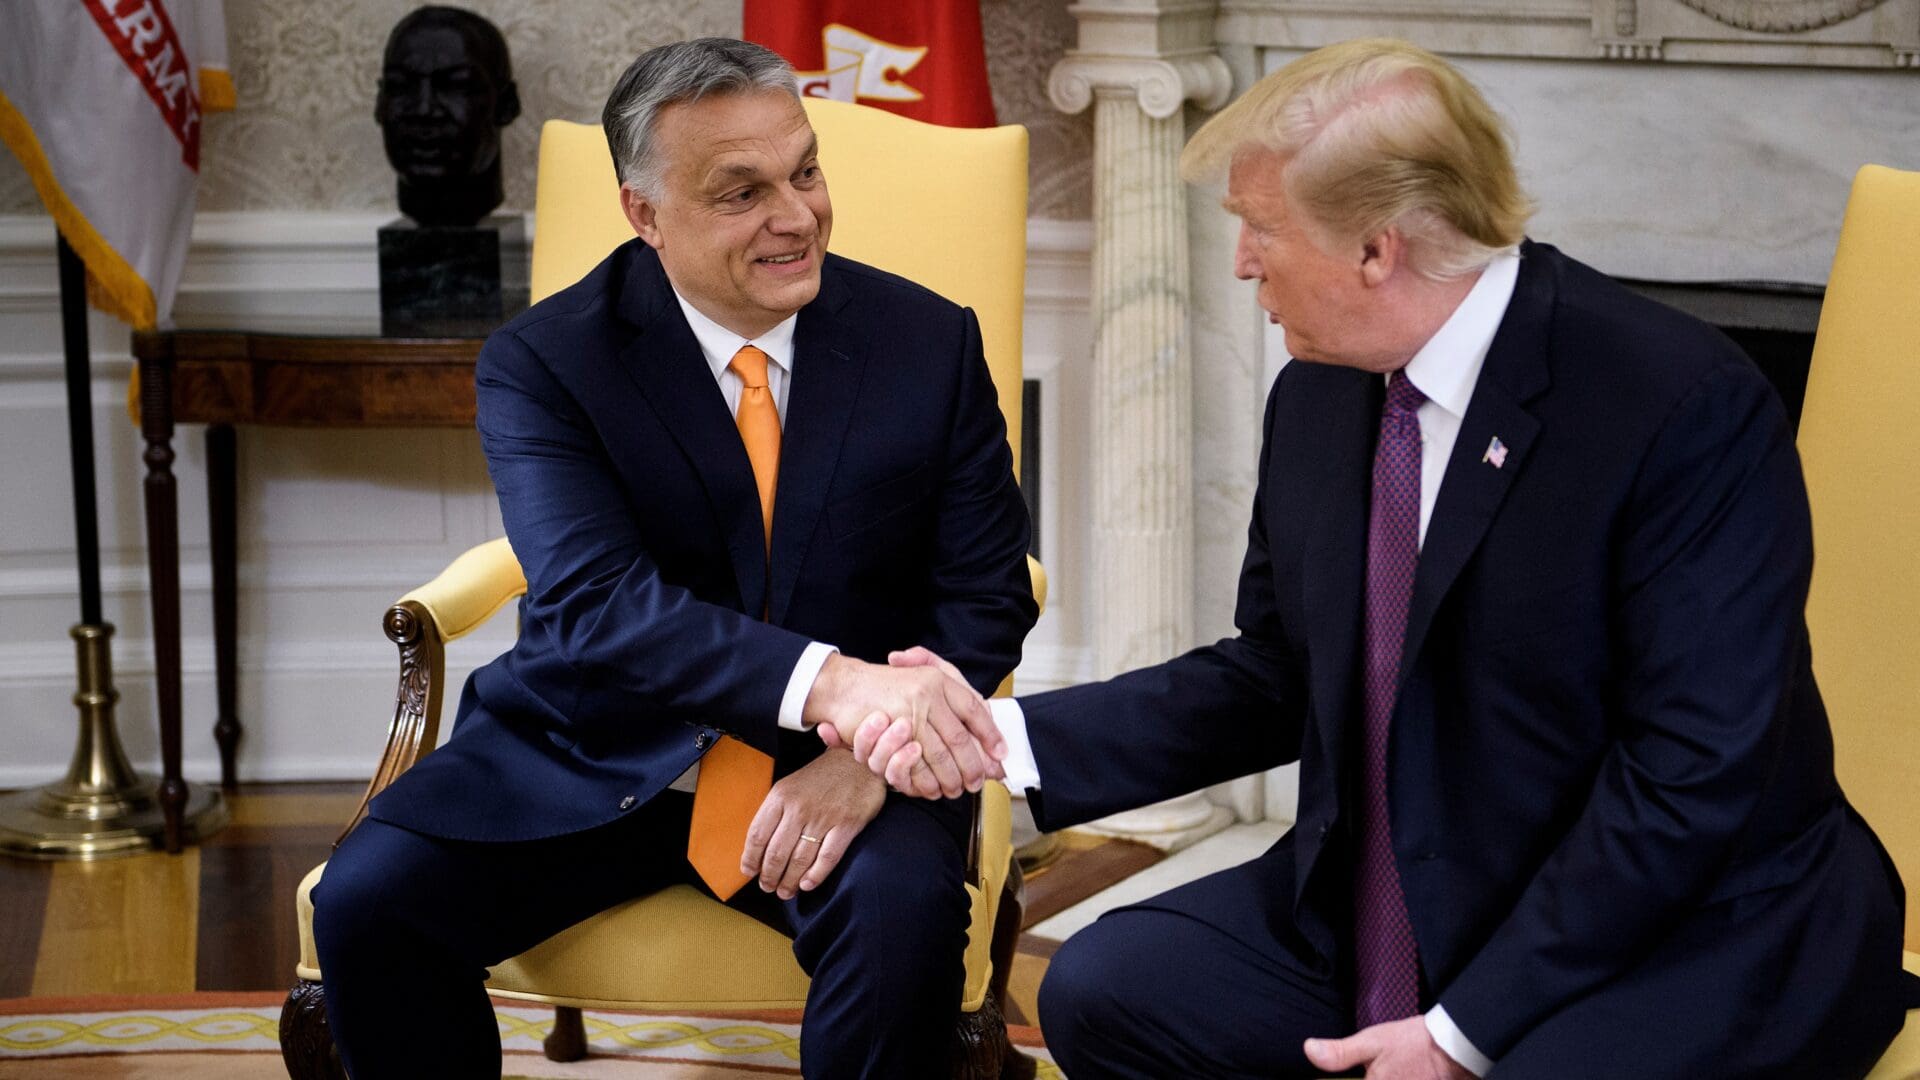 Hungarian Prime Minister Viktor Orbán and US President Donald Trump shake hands before a meeting in the Oval Office on 13 May 2019 in Washington, DC